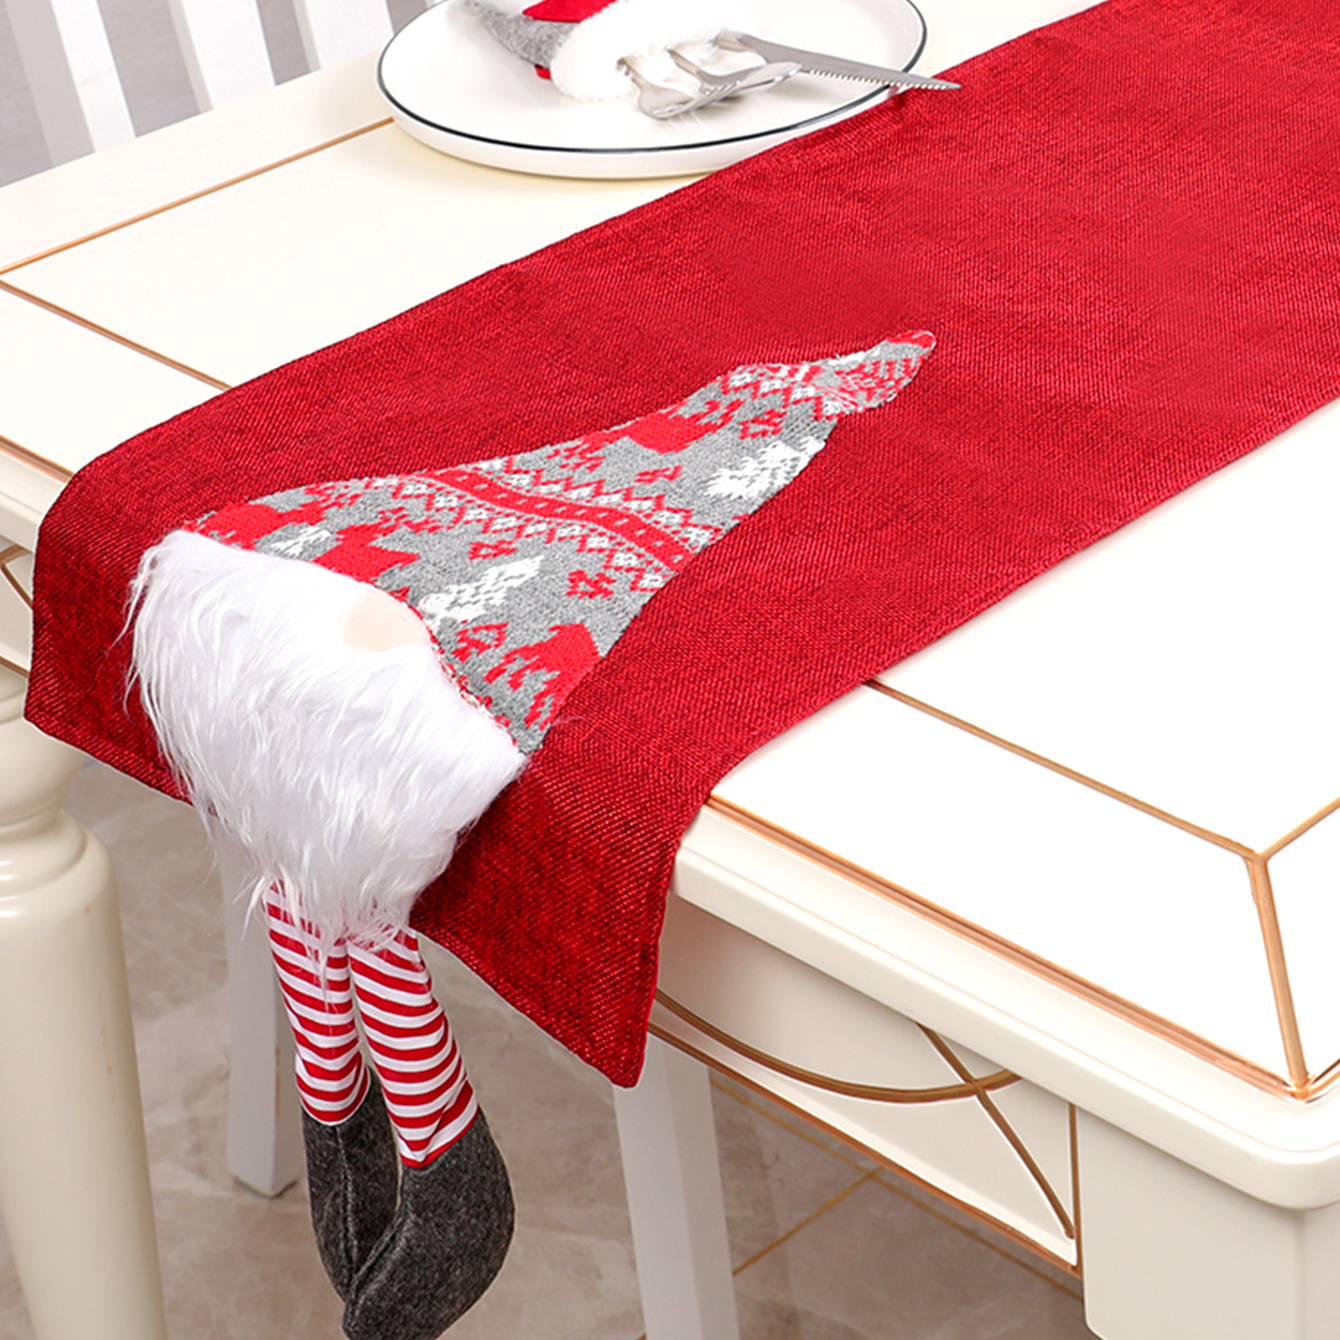 Christmas decoration faceless doll Rudolph dining table cloth redpicture2